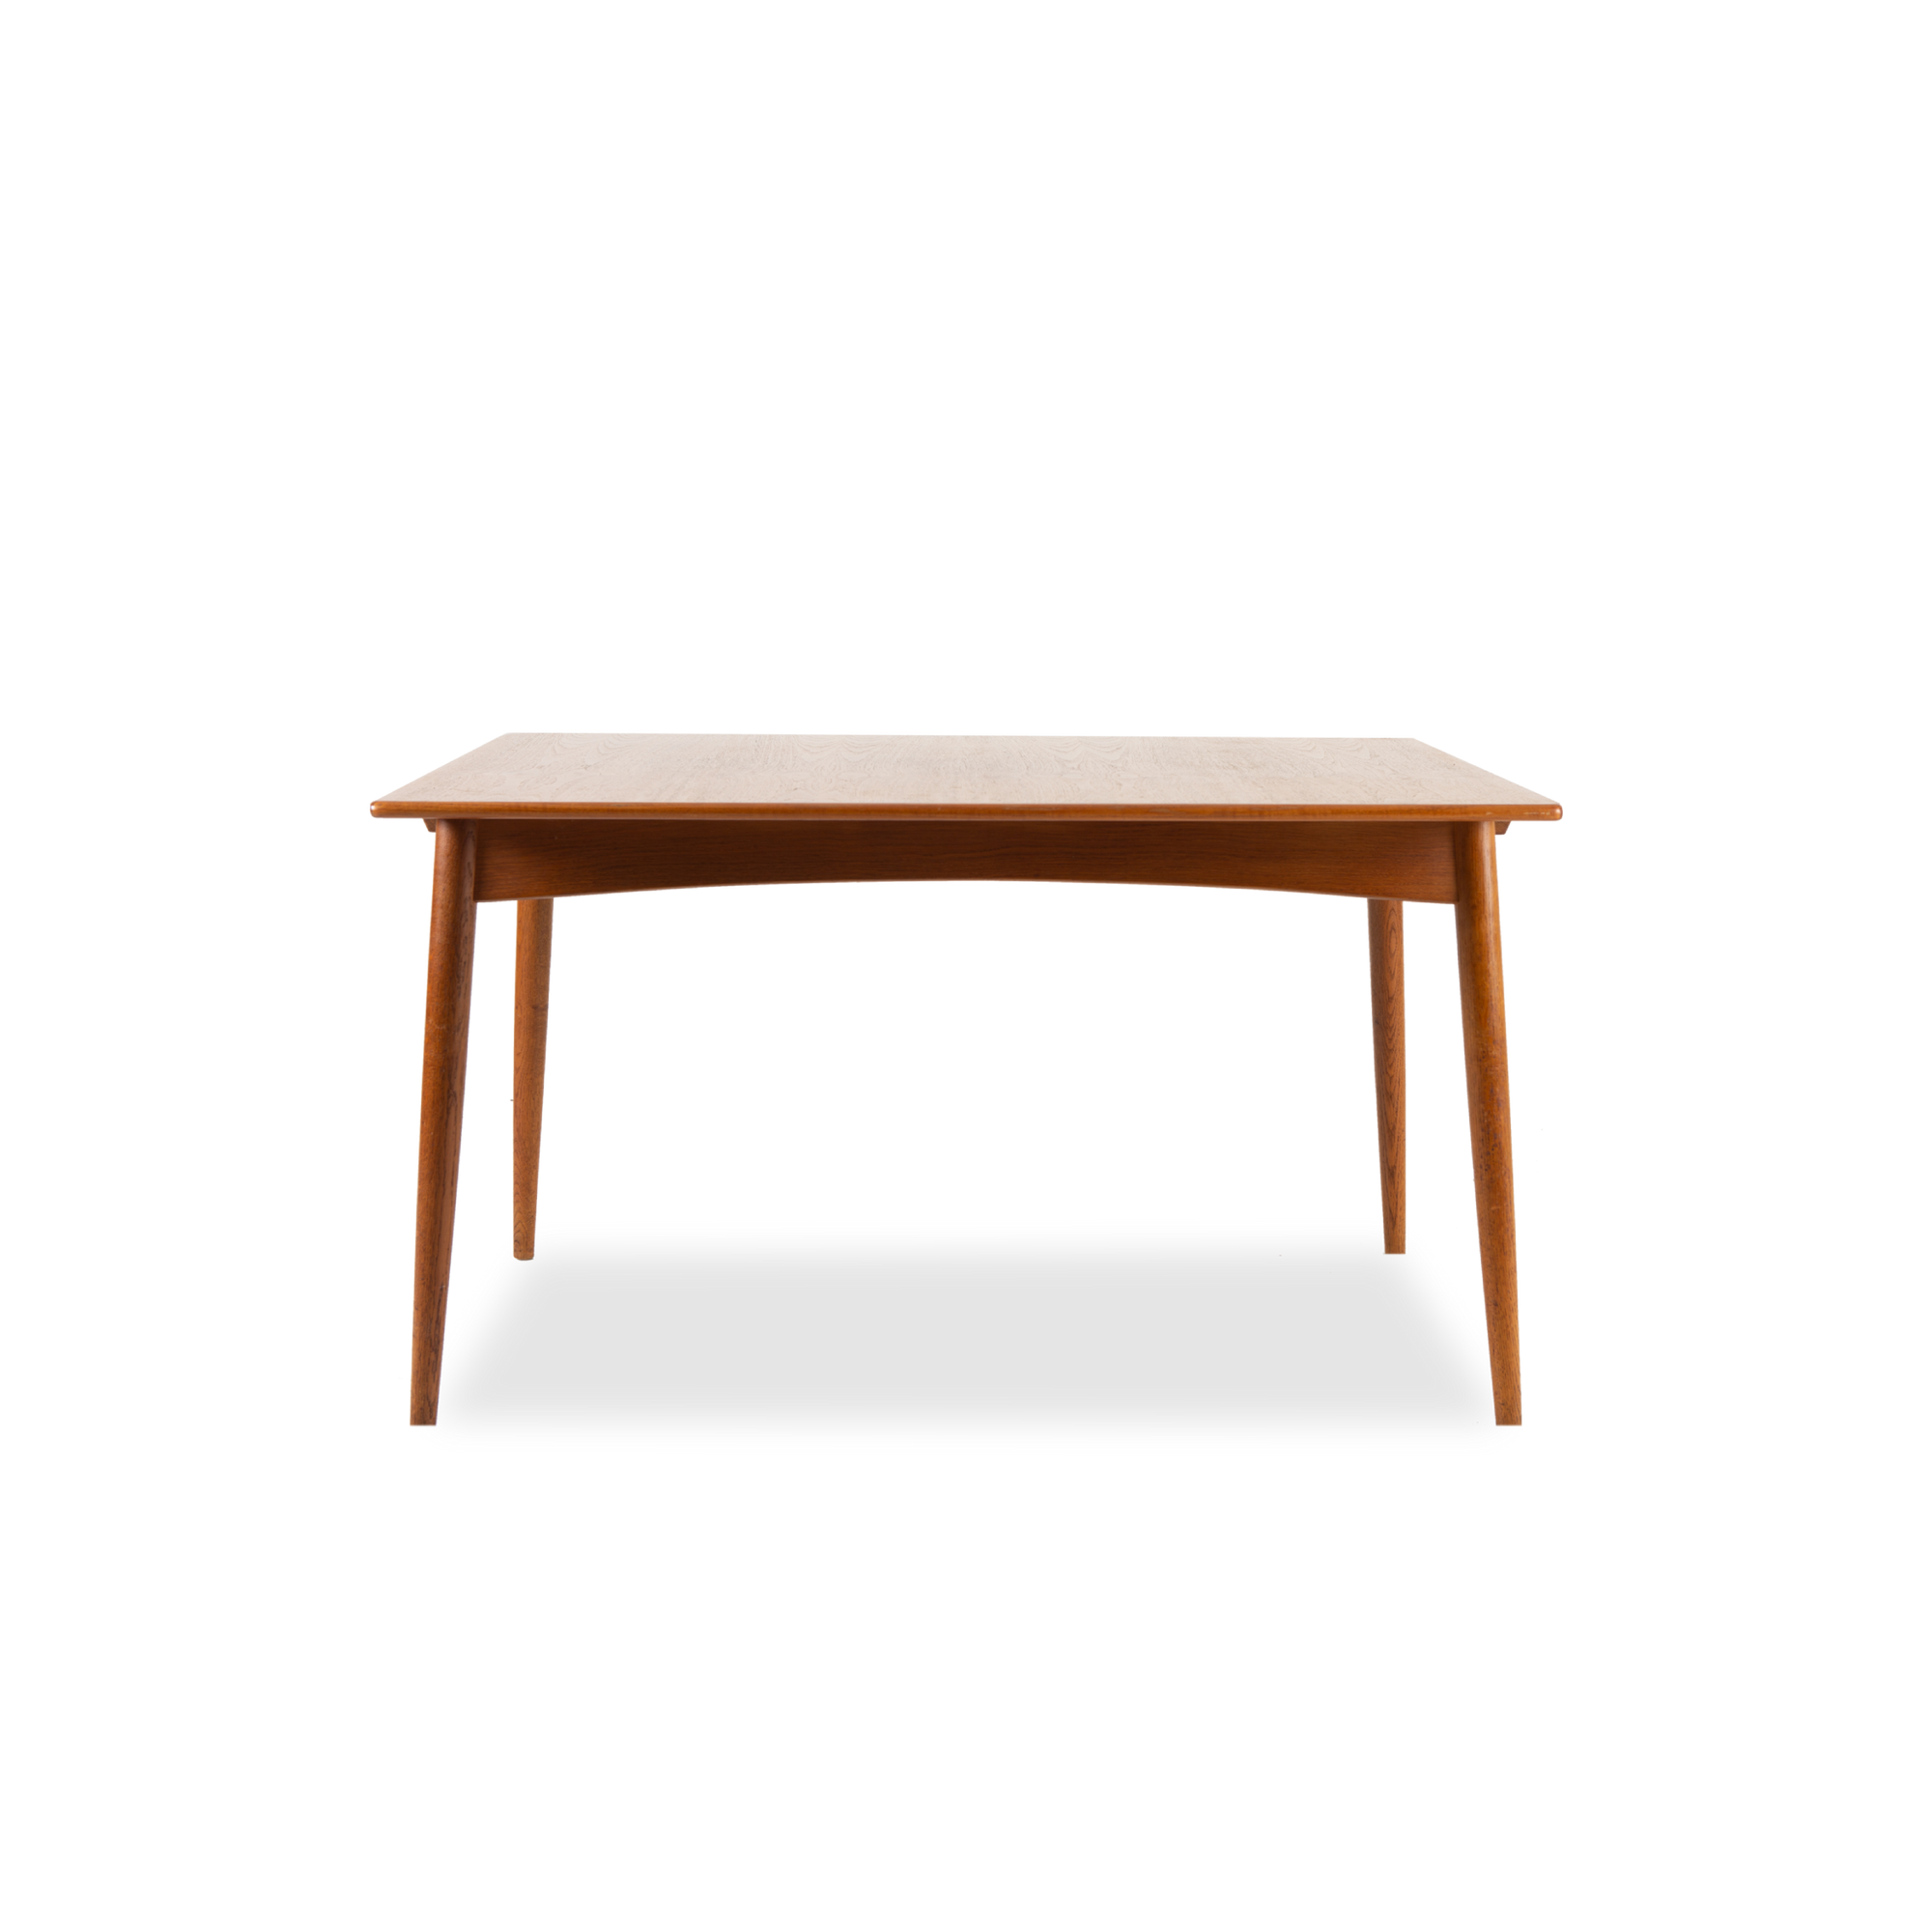 Displaying a unique mix aged teak and oak wood, this rare vintage dining table was designed by Hans Wegner and produced in Denmark, circa 1960s.